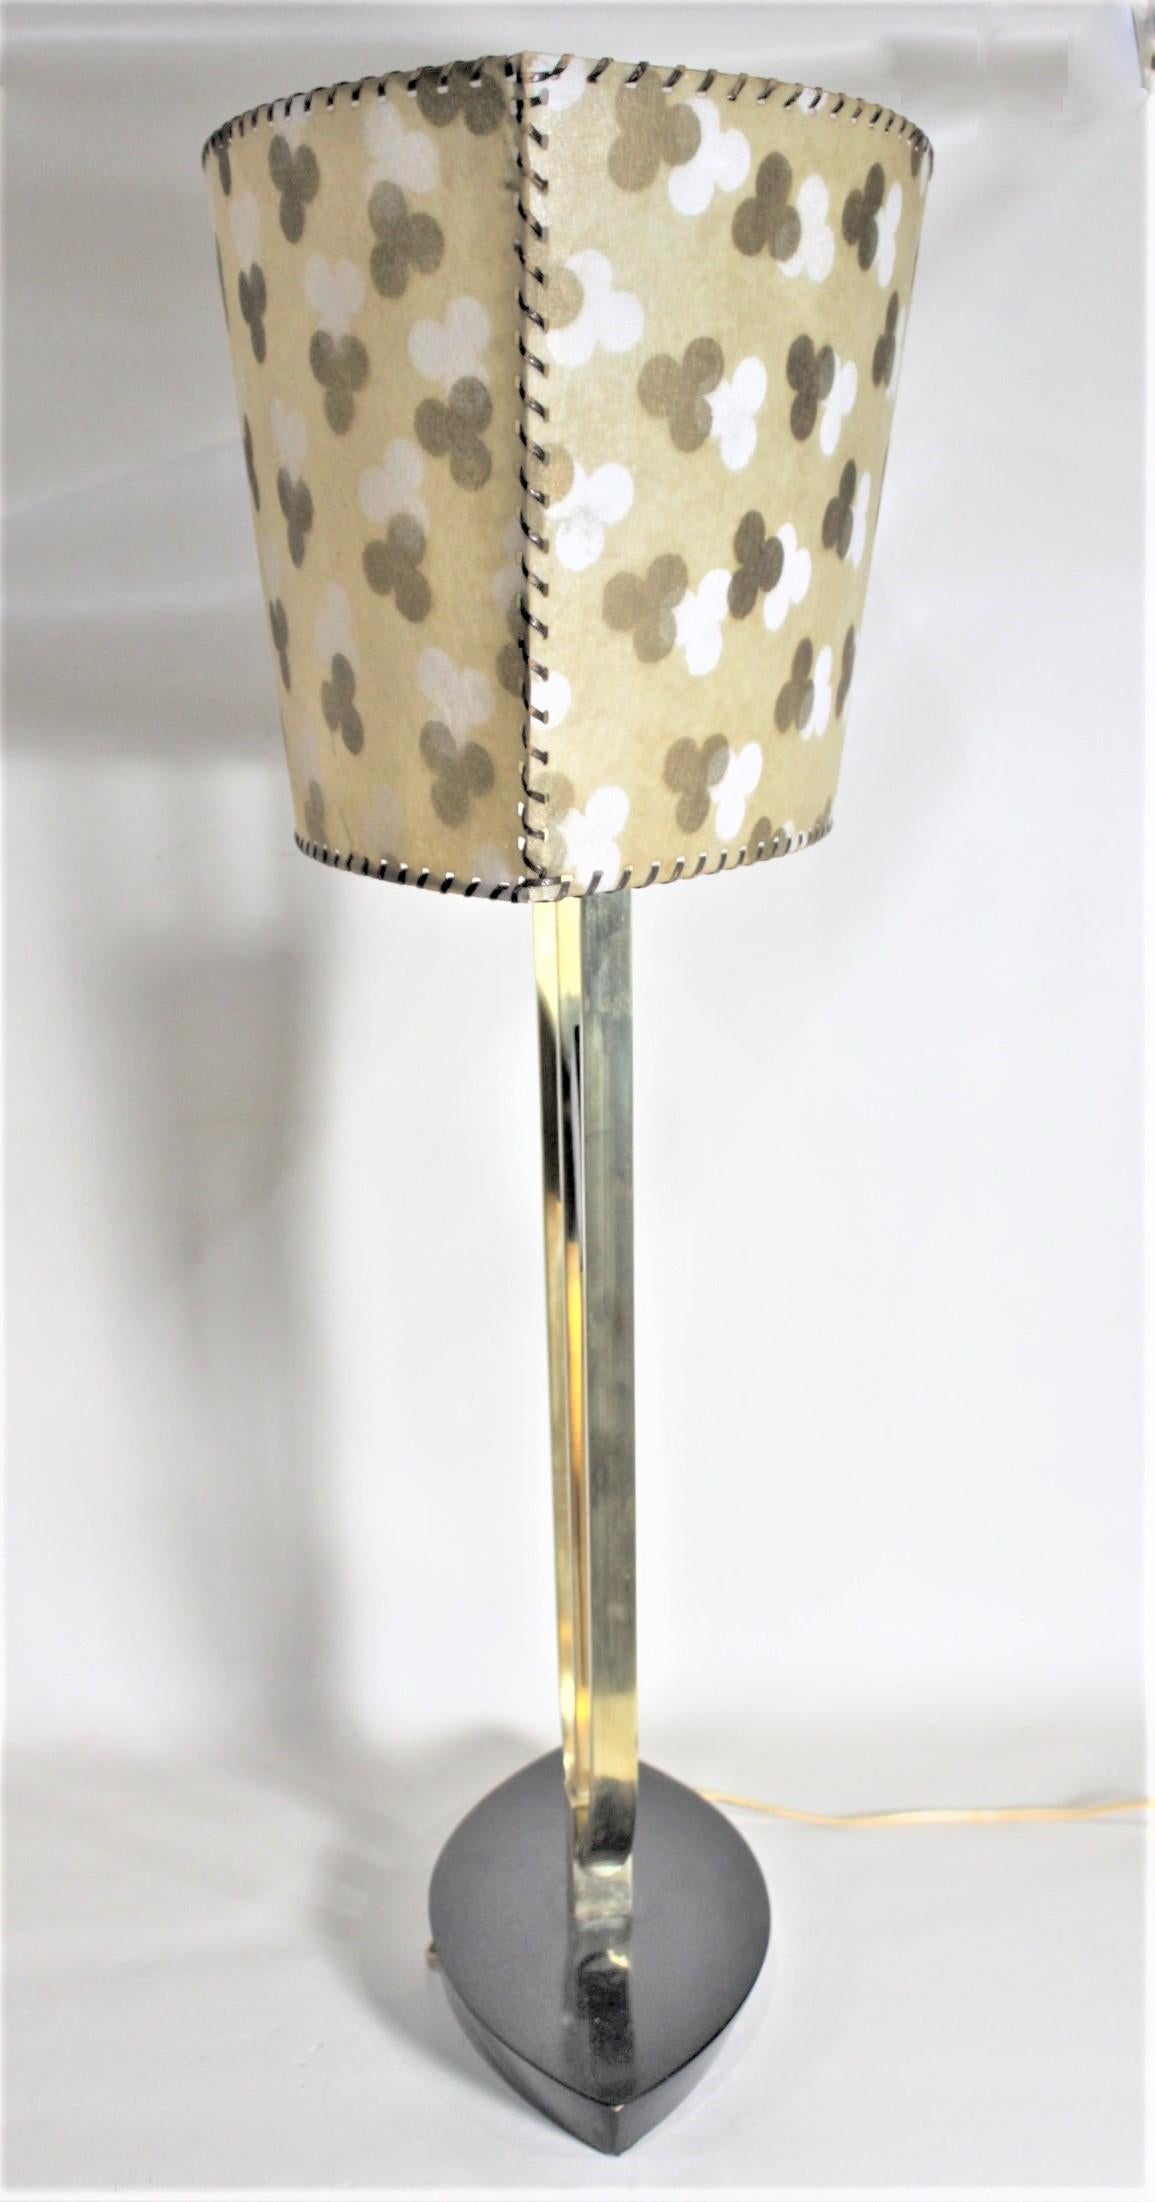 Lacquered Mid-Century Modern Rembrandt Styled Table Lamp with Patterned Fiberene Shade